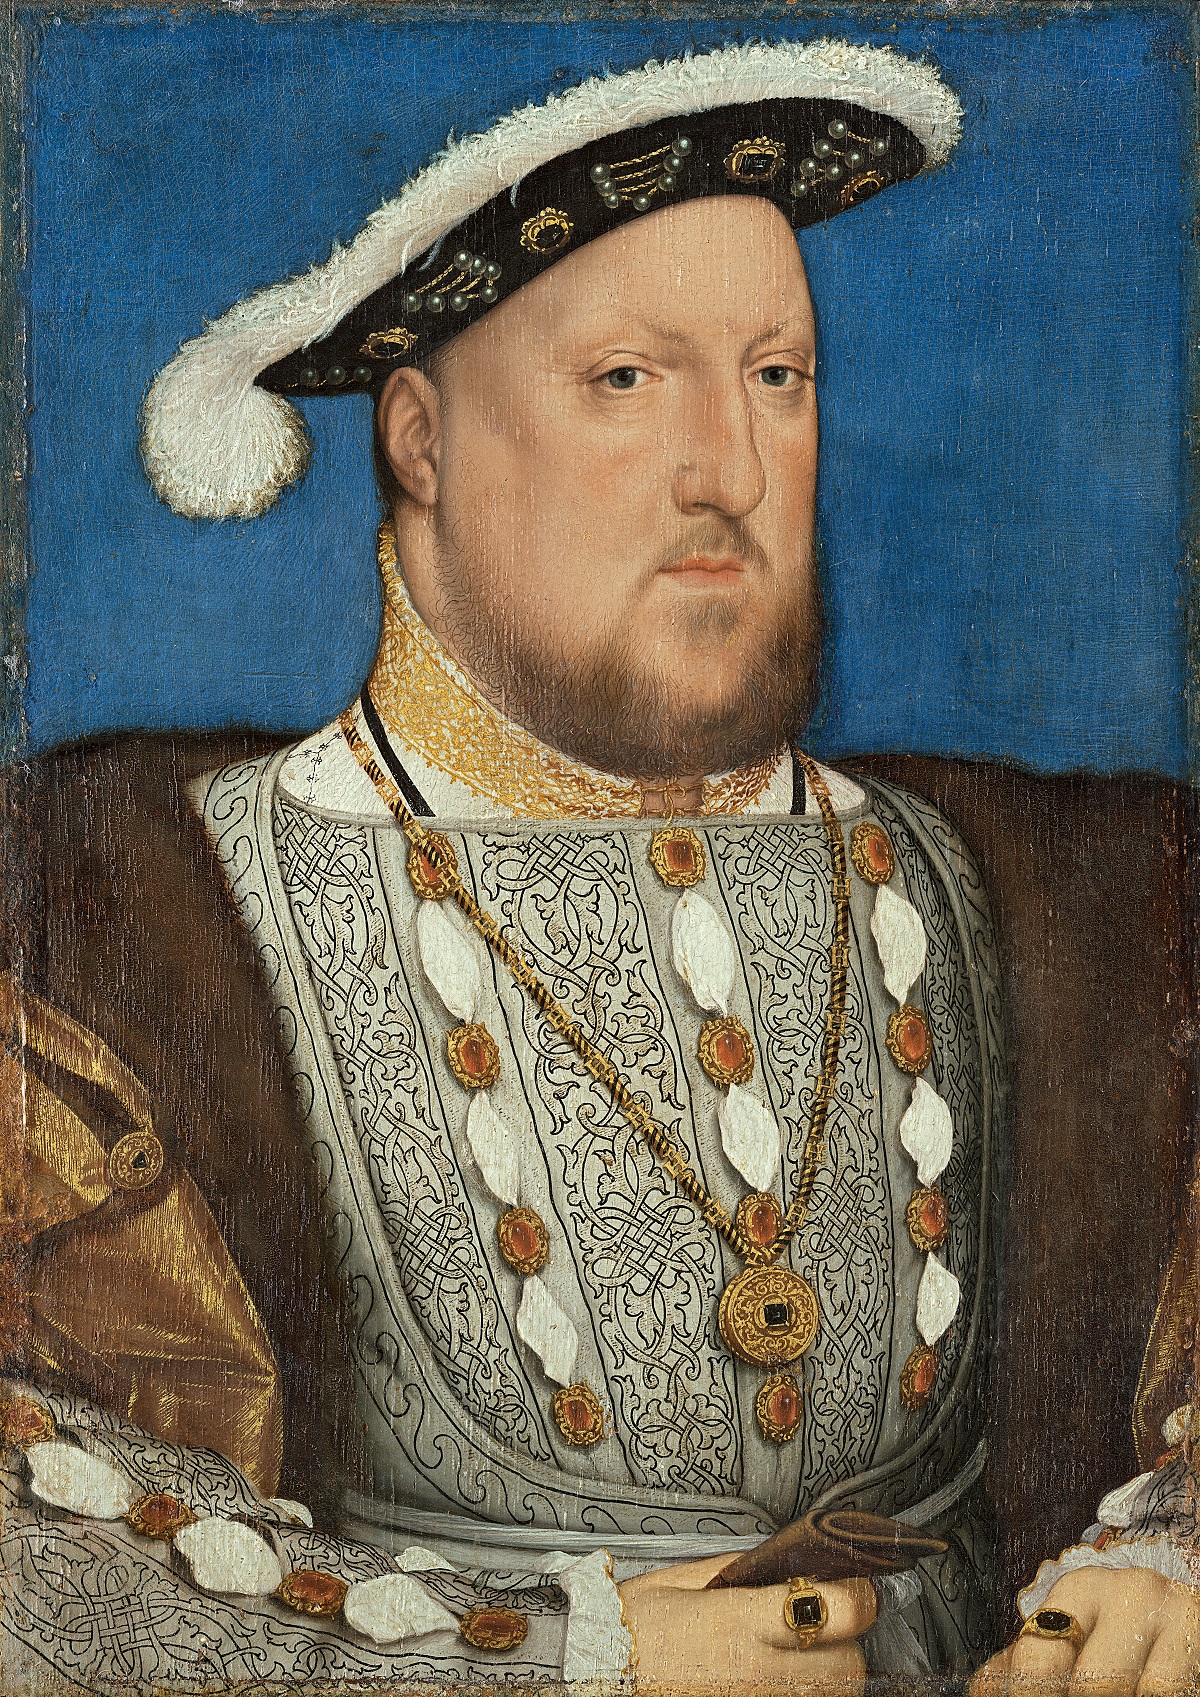 Hans Holbein the Younger (German, Augsburg 1497-98–1543 London), ‘Henry VIII,’ circa 1537. Oil on wood, 11 by 7 7/8in. (28 by 20cm). Museo Nacional Thyssen-Bornemisza, Madrid. Image © Museo Nacional Thyssen- Bornemisza, Madrid